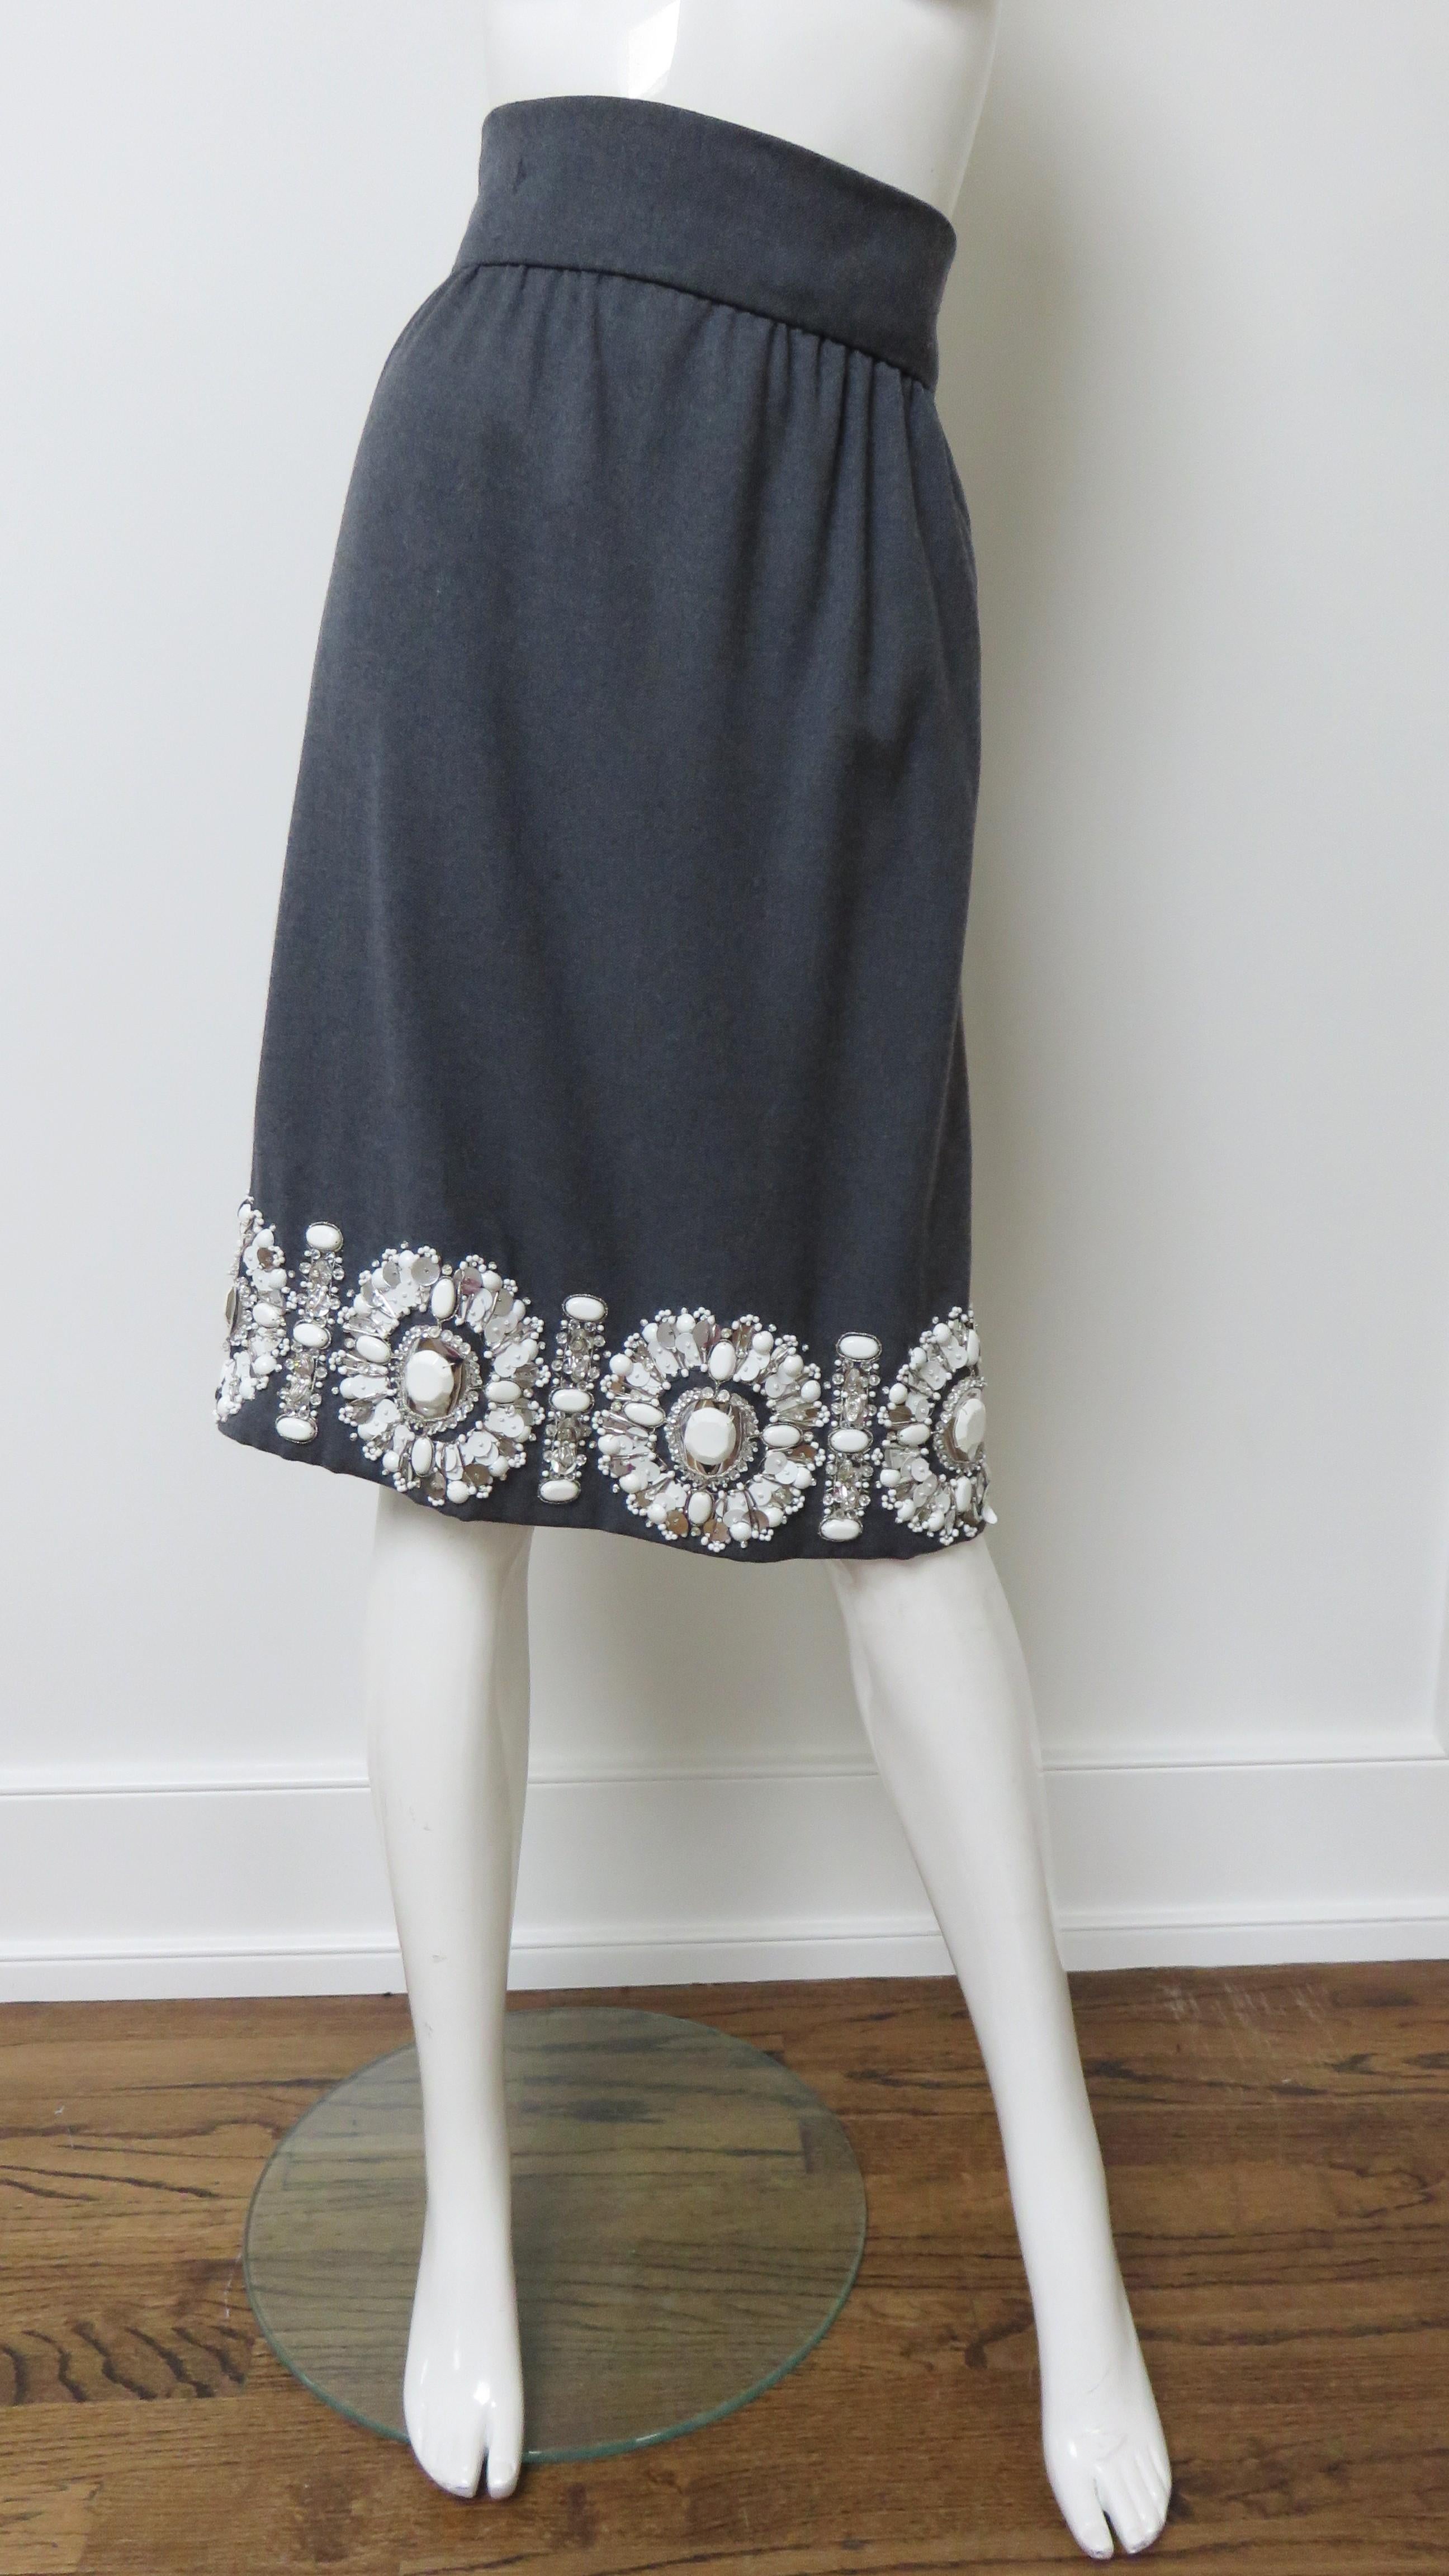 1960s Grey Skirt with Elaborate Bead Trim In Good Condition For Sale In Water Mill, NY